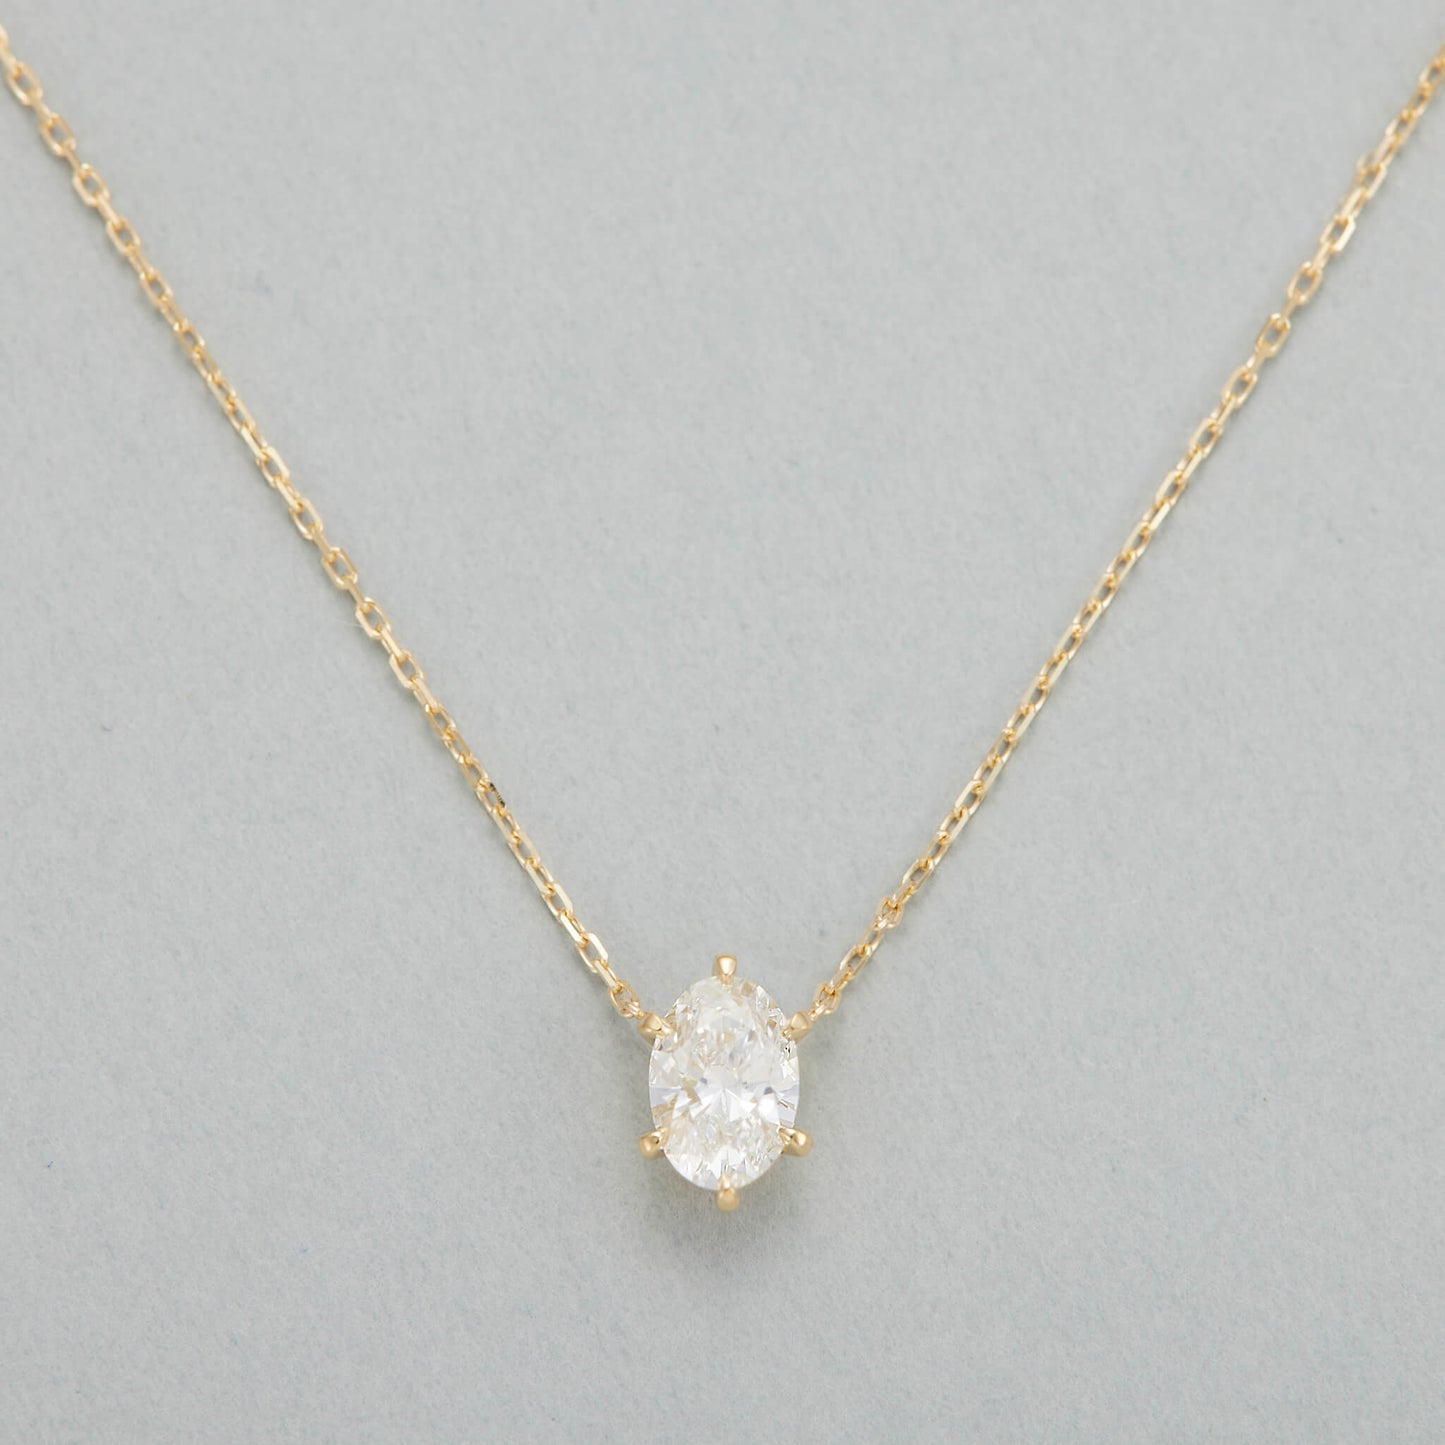 HA SIMPLY Oval Necklace / K18 Yellow Gold / 0.5-0.6 Carat